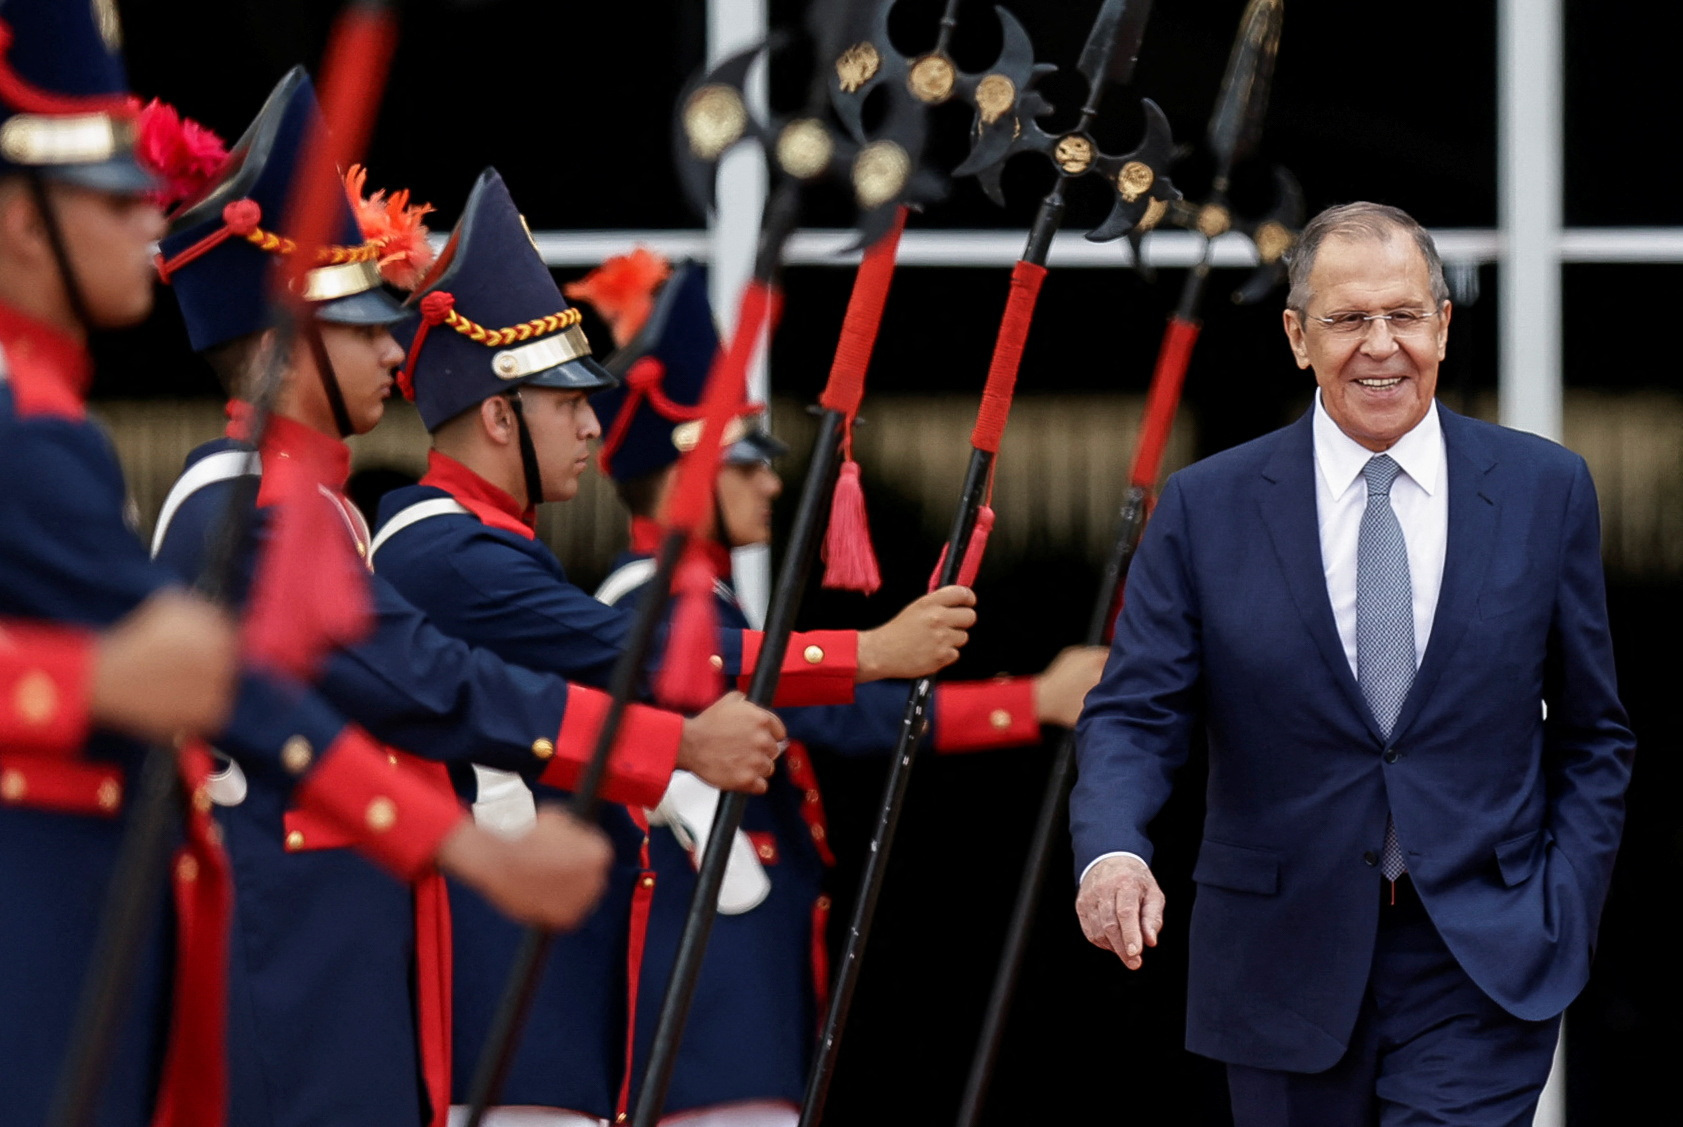 Russia's Foreign Minister Lavrov on state visit to Brazil